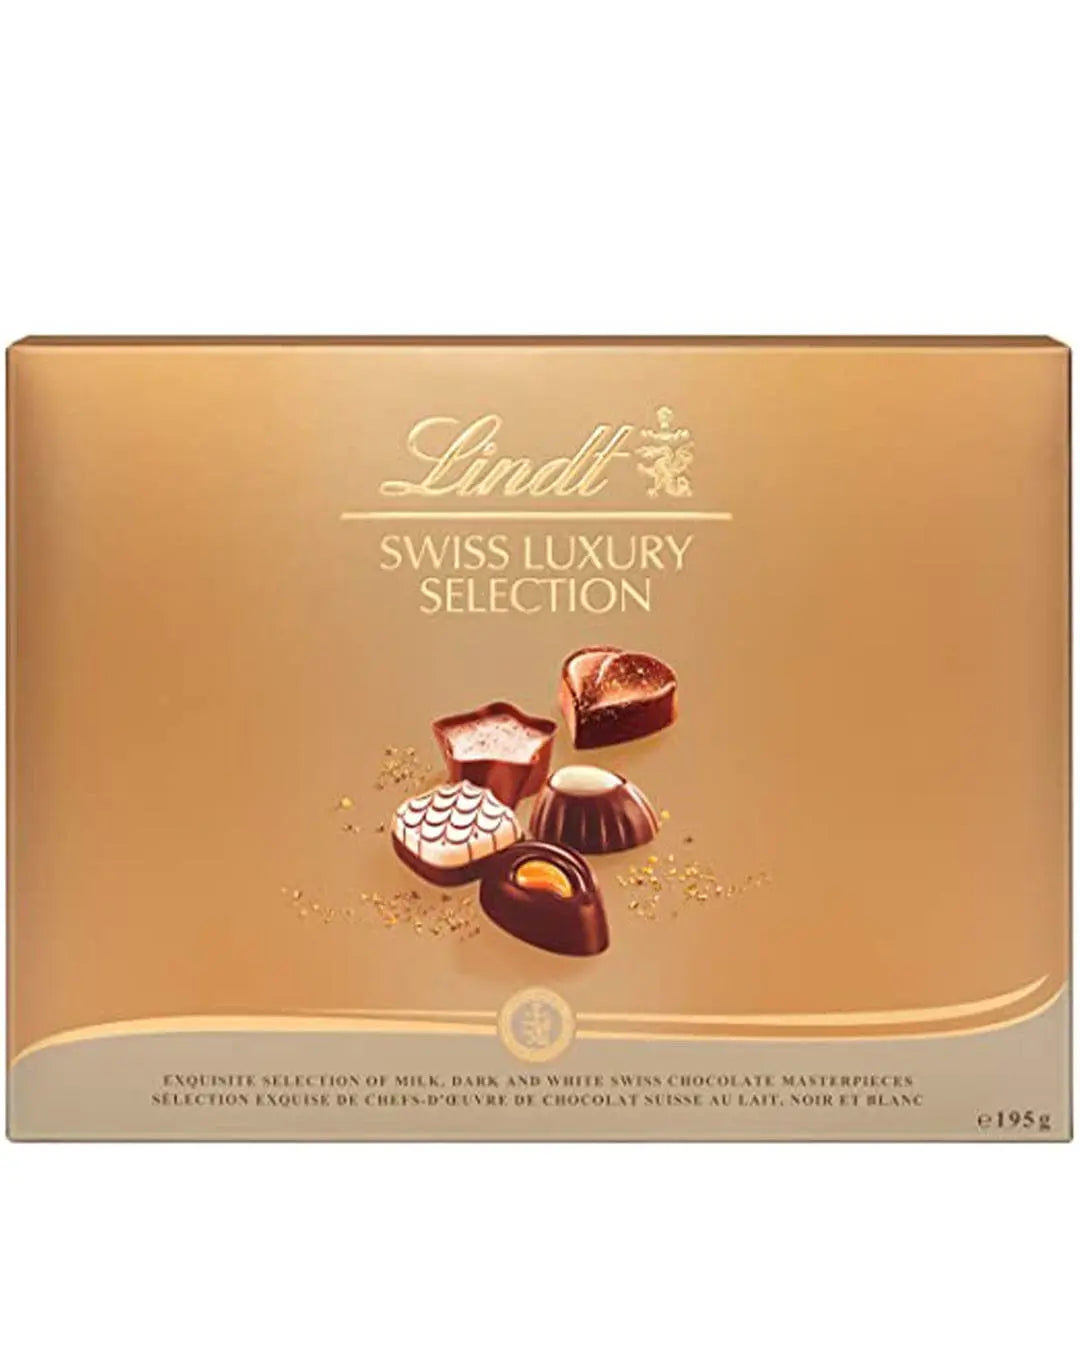 Lindt Swiss Luxury Selection, 195 g Chocolate